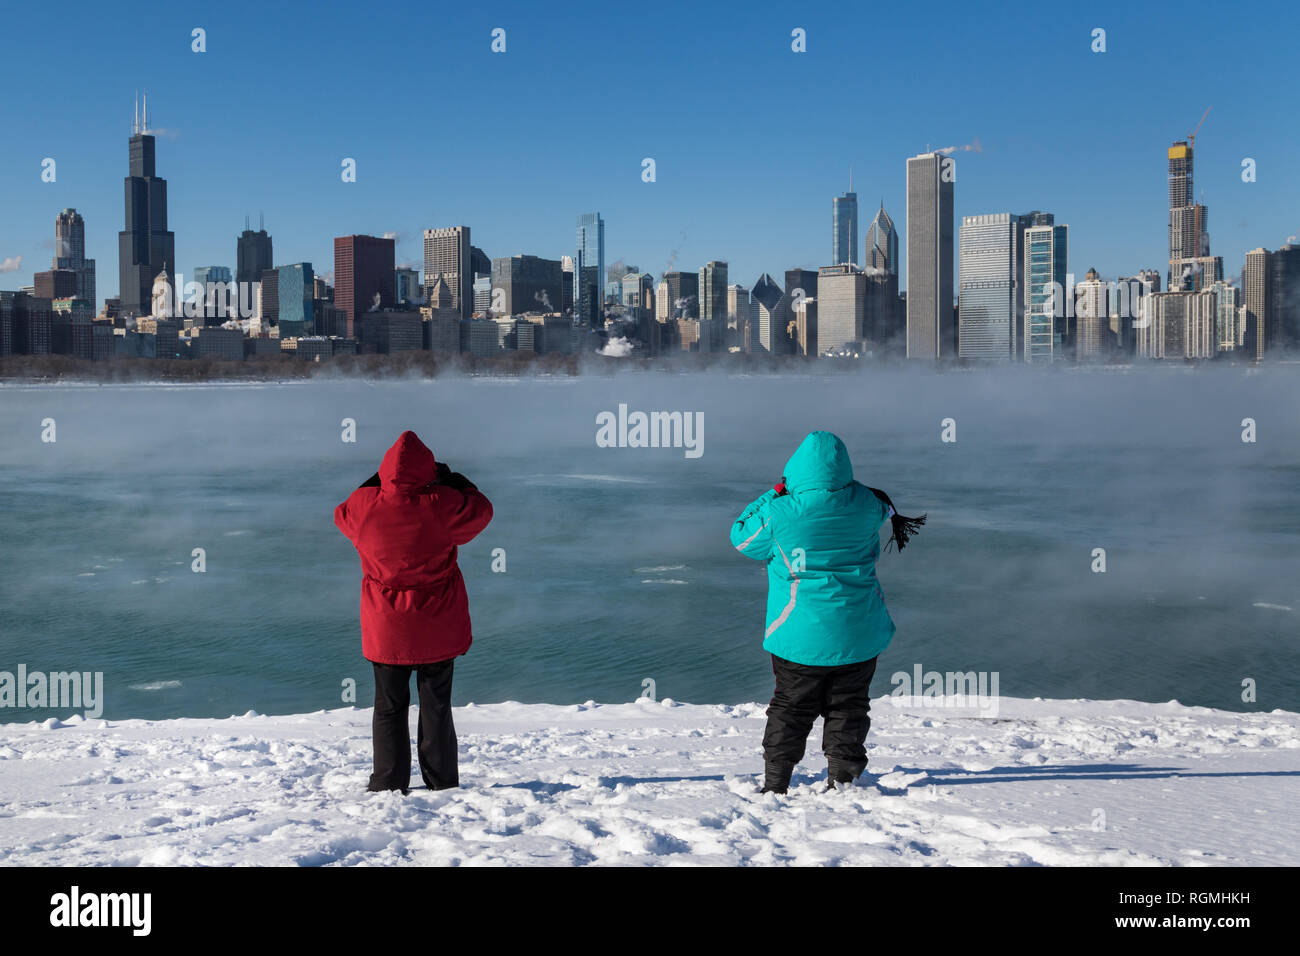 Chicago, USA. 30th Jan 2019. Despite the polar vortex and temperatures of 20 below zero some hardy folks ventured to Chicago's shoreline to see the unusual winter fog effect rising from the not yet frozen Lake Michigan Credit: Matthew Kaplan/Alamy Live News Stock Photo